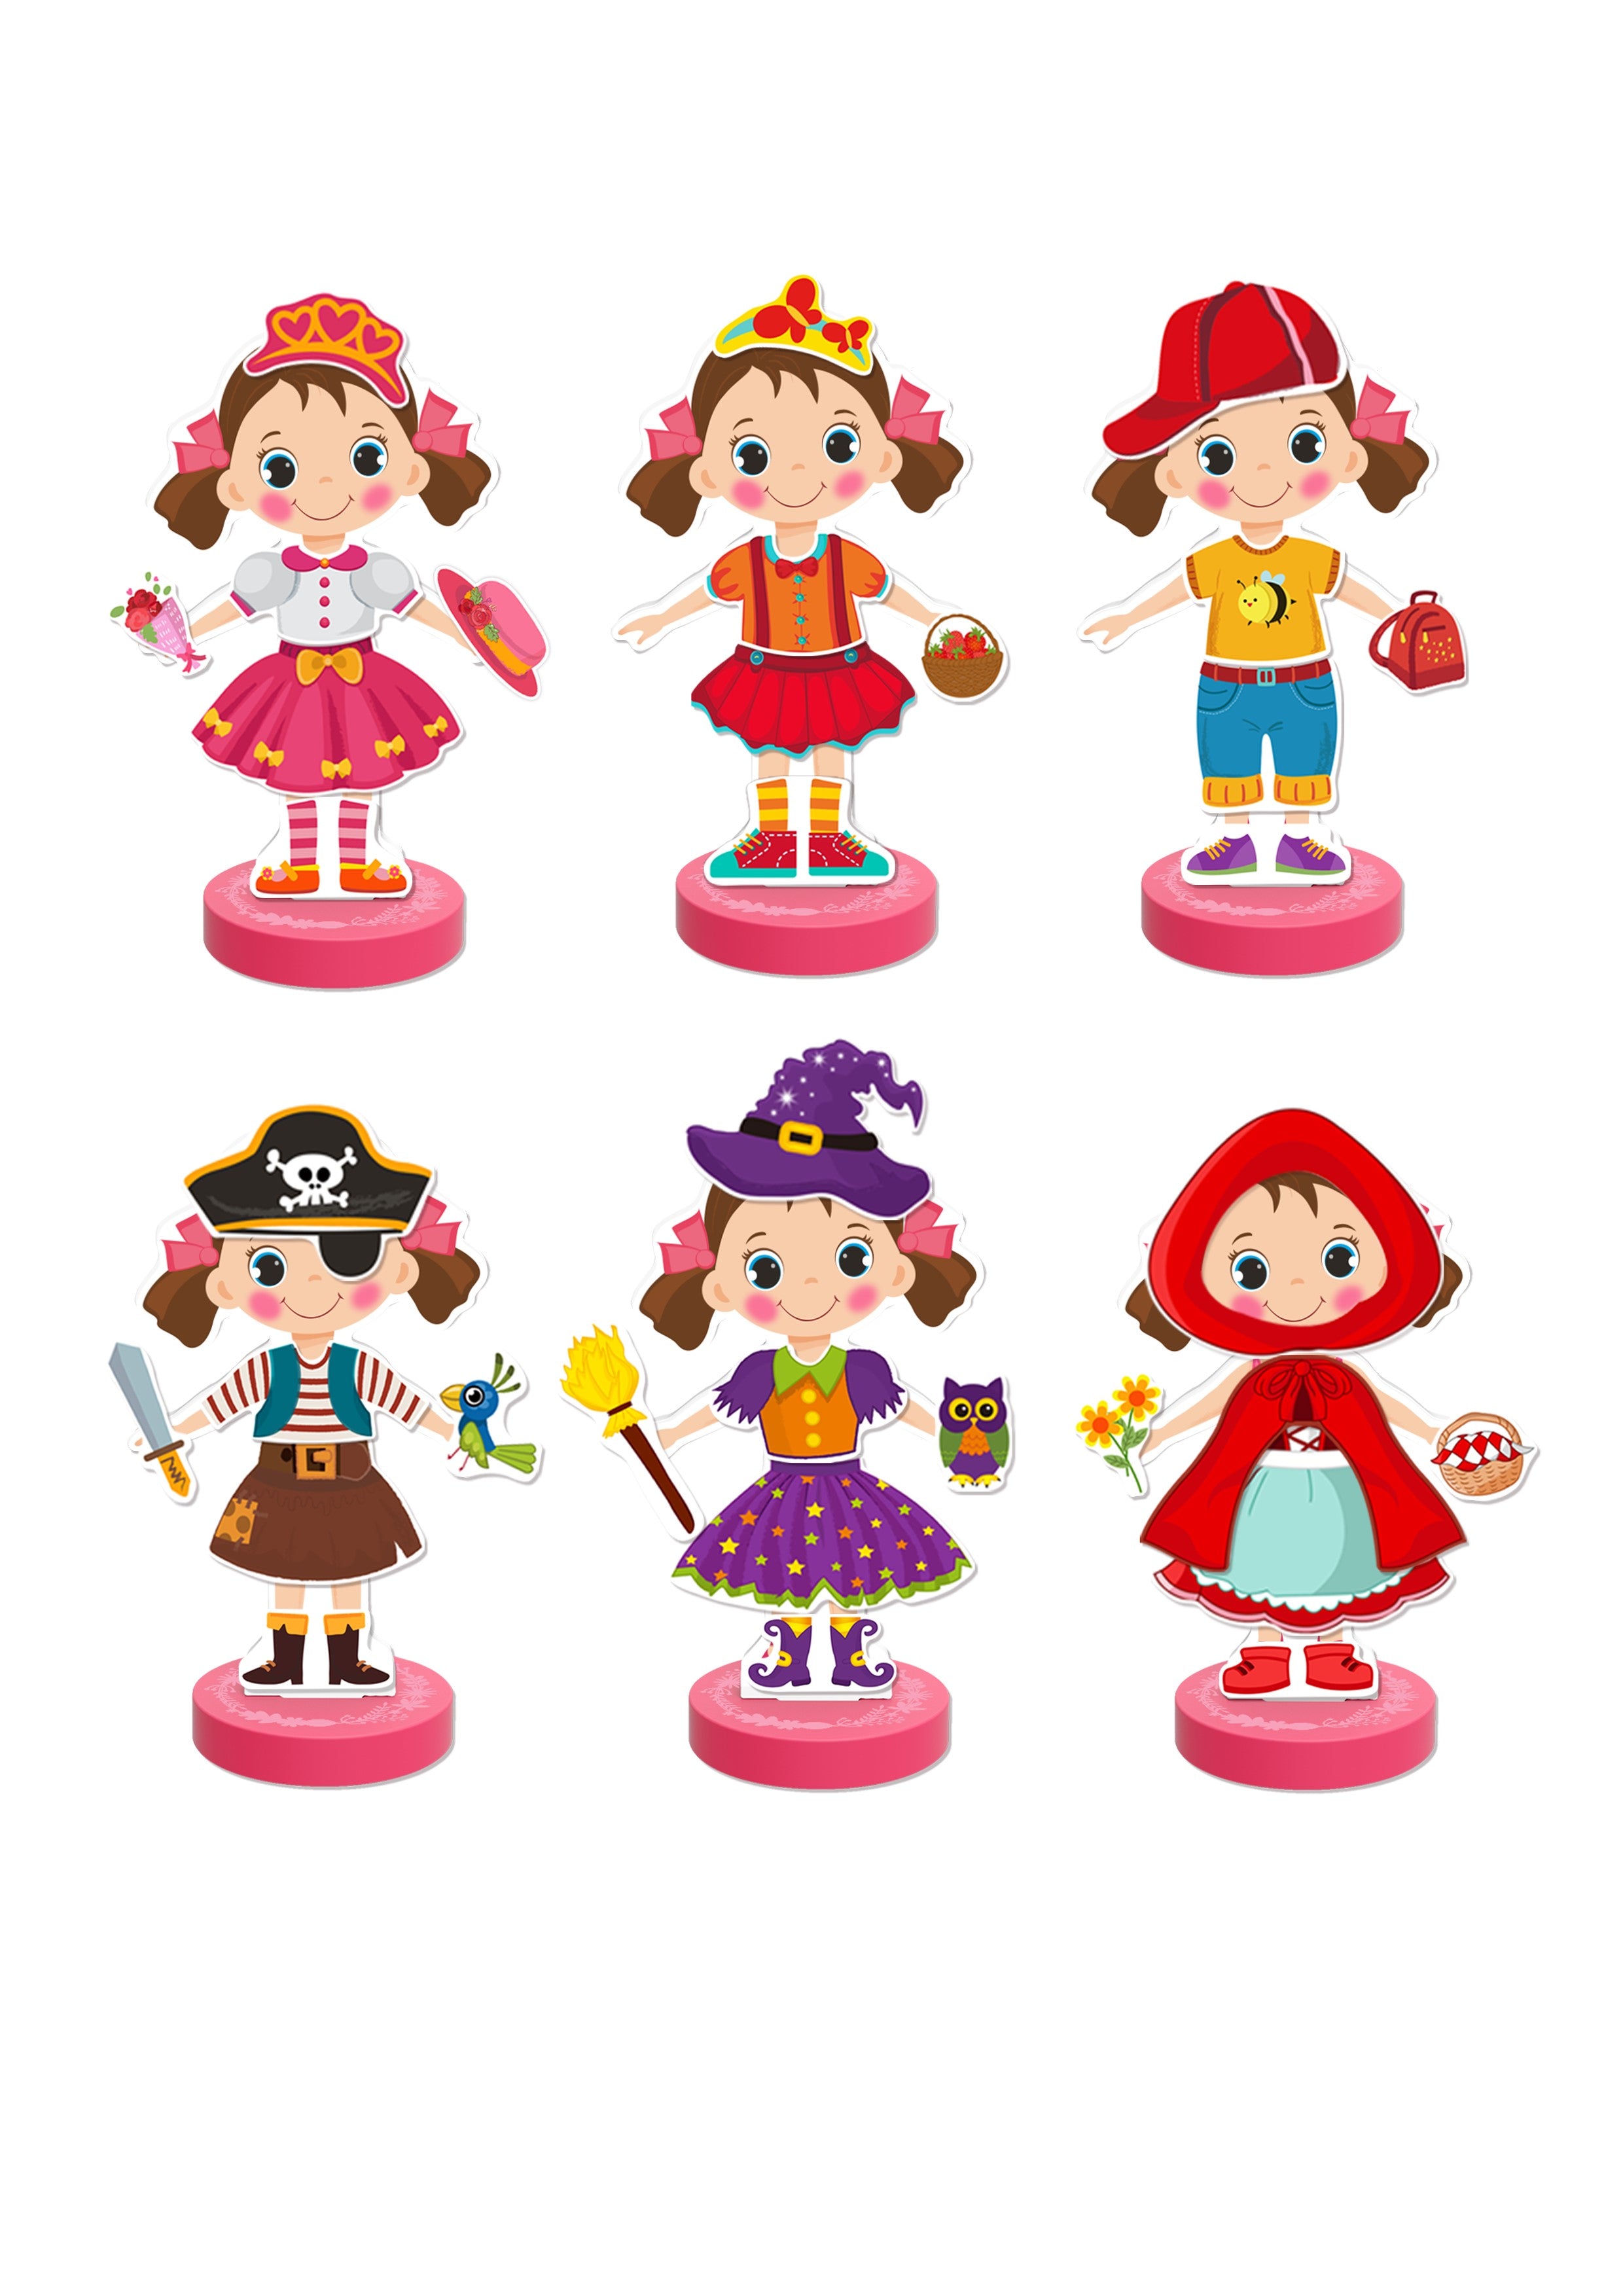 Toyster's Magnetic Wooden Dress-Up Dolls Toy